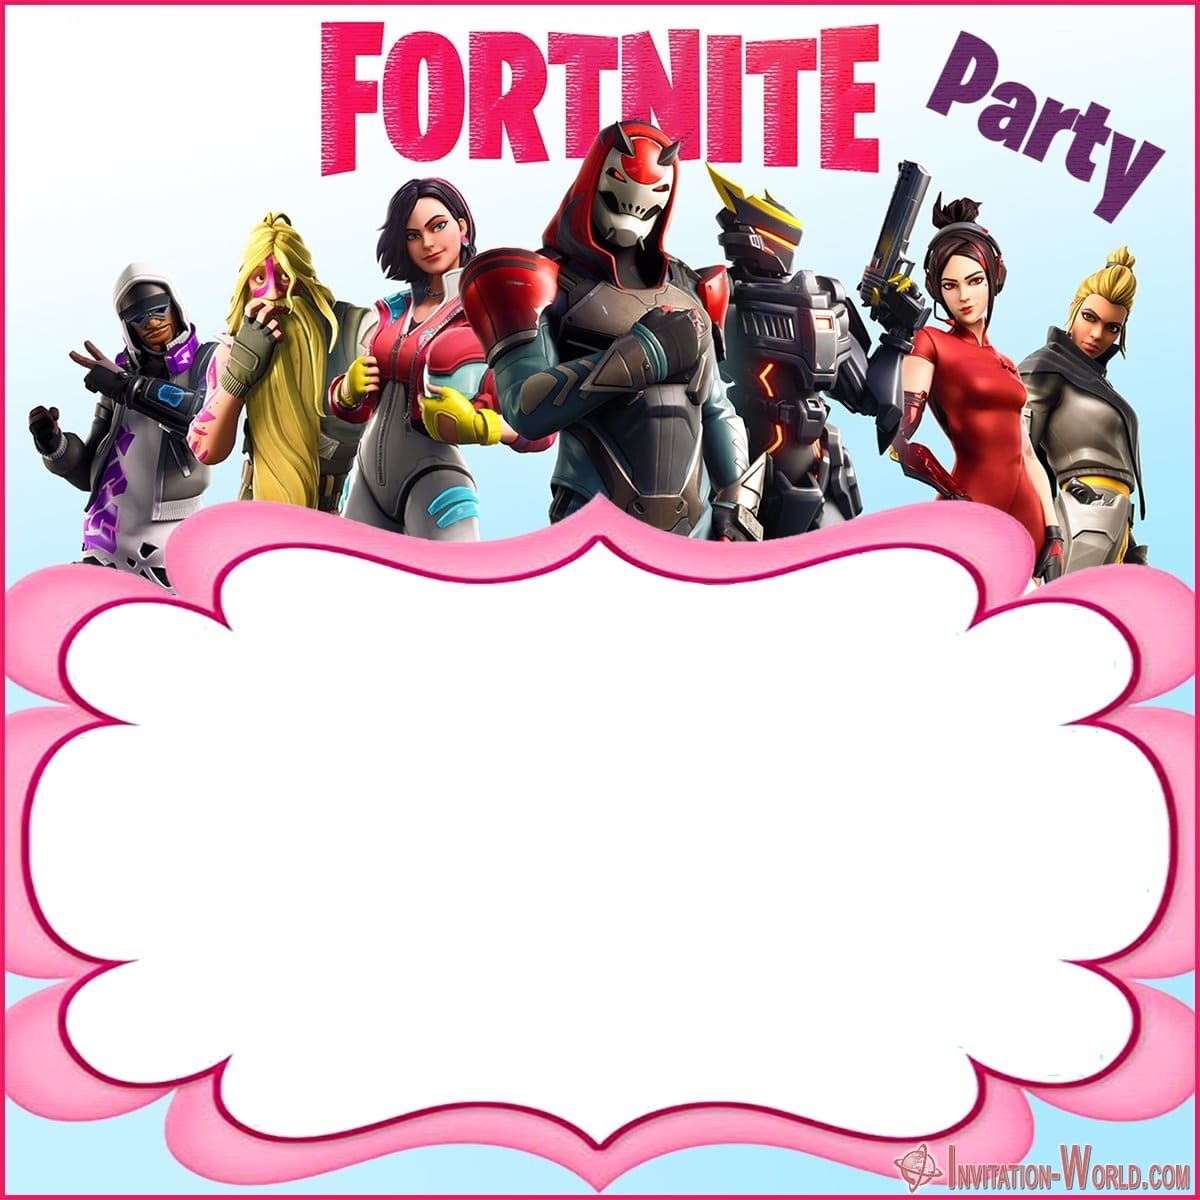 Free Printable Fortnite template 1200x1200 - 8 Fortnite Invitation Templates for Epic Party